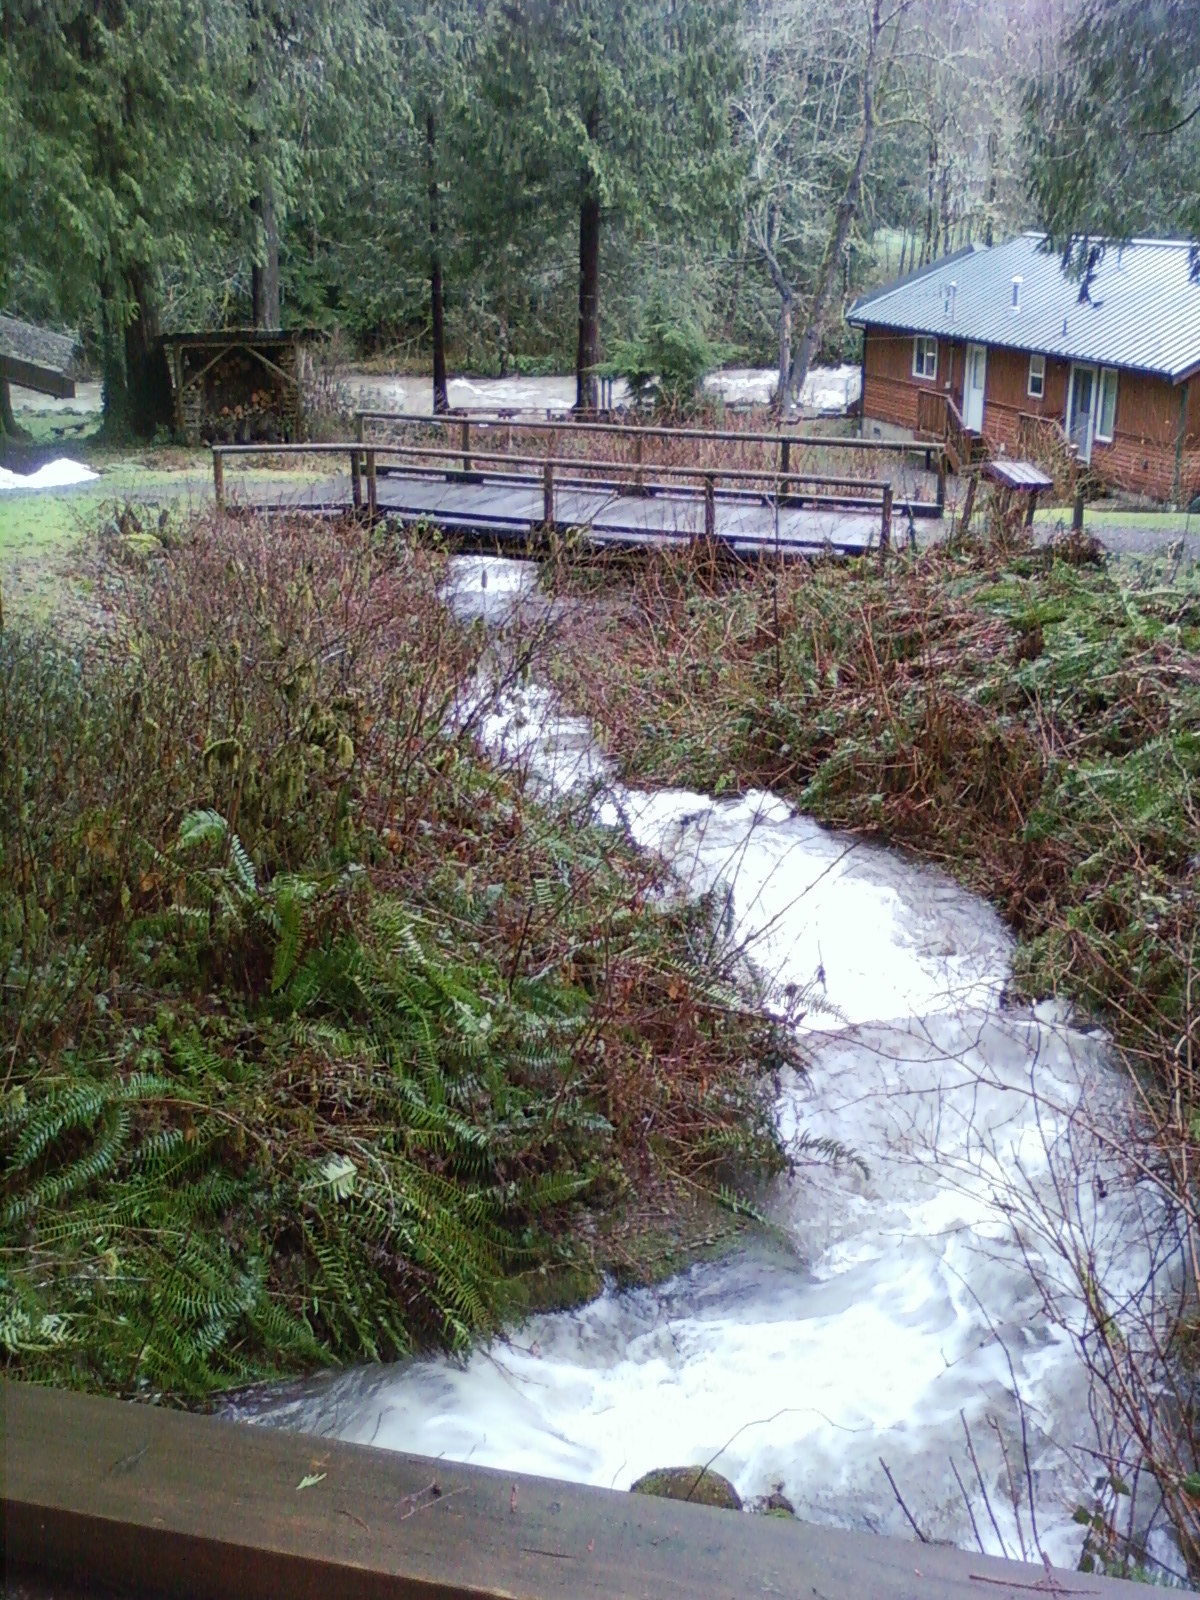 The stream on the right side of the house